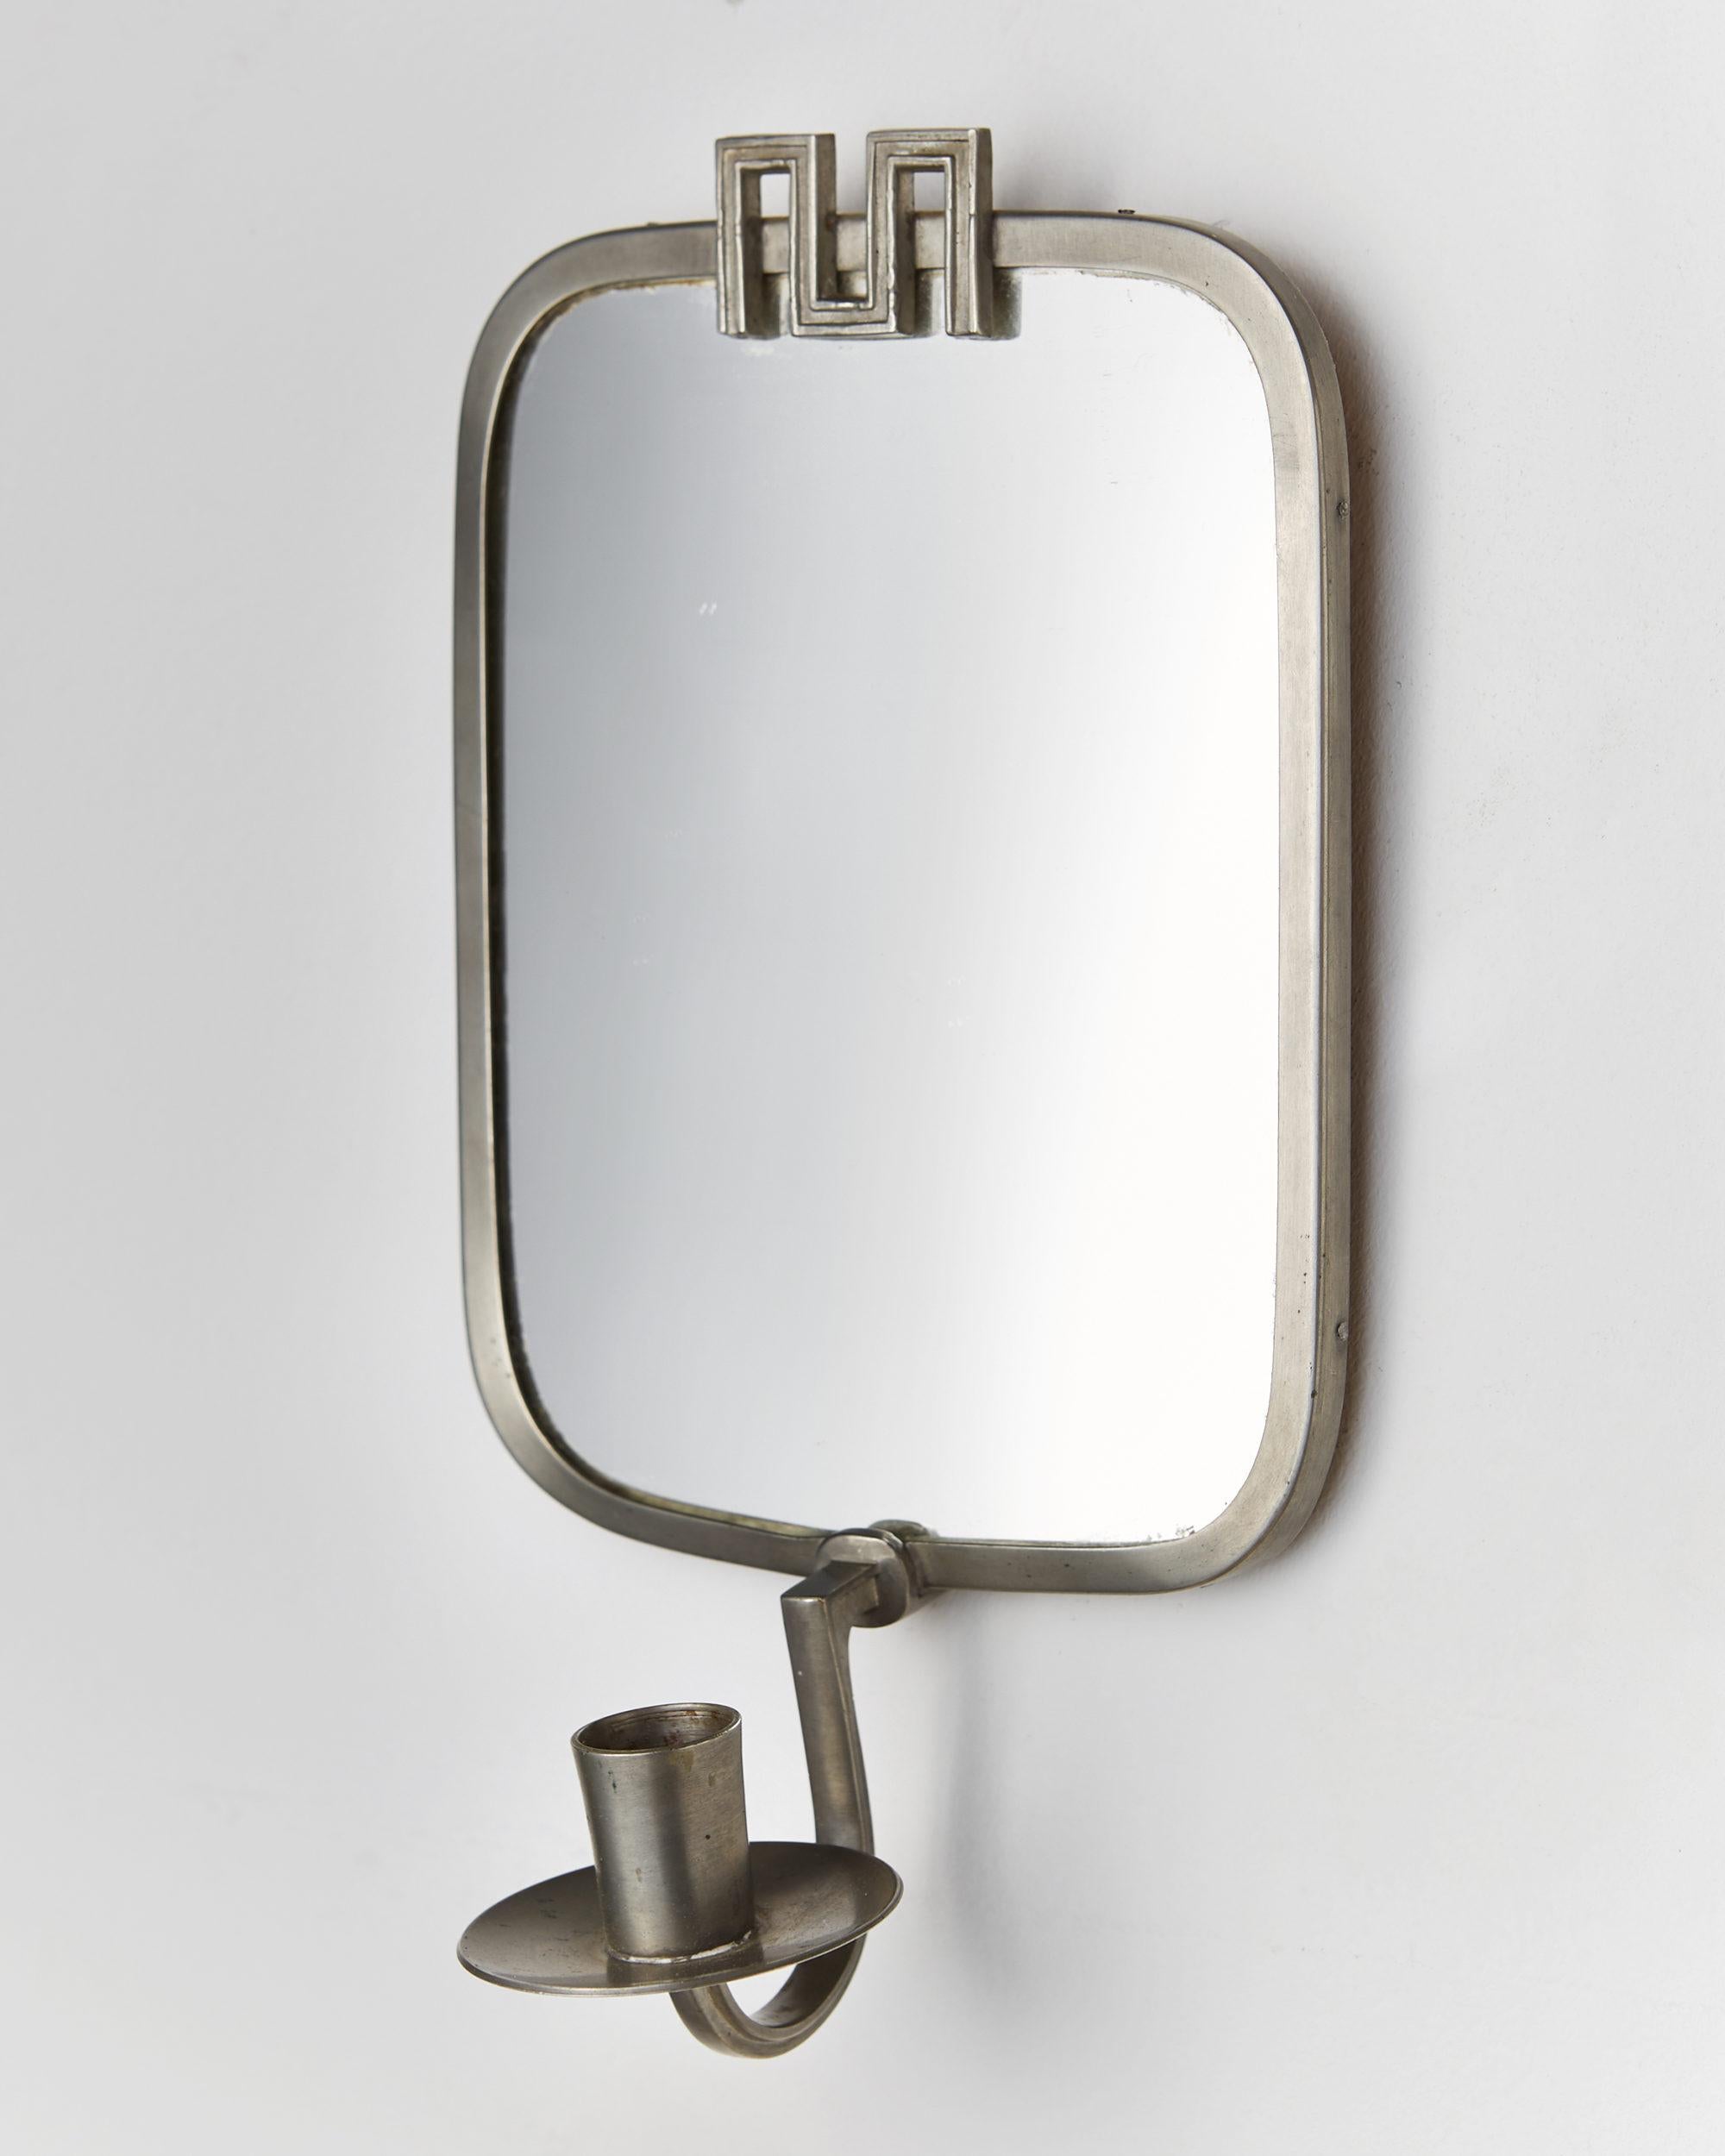 Scandinavian Modern Mirror and Two Candleholders Designed by Nils Fougstedt for FAK, Sweden, 1933